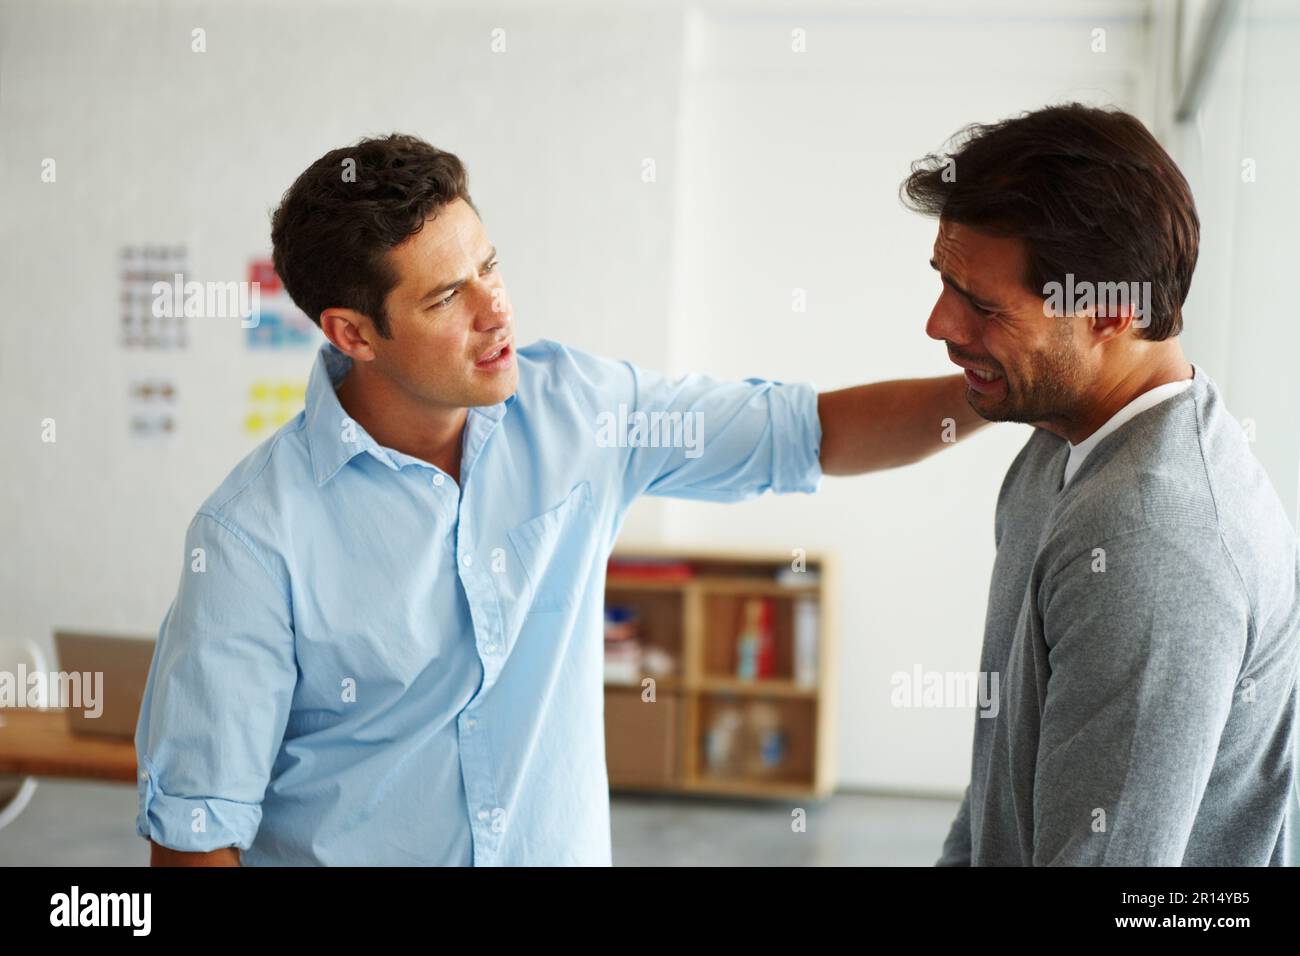 Helping a devastated friend. A young man consoling his sobbing friend. Stock Photo